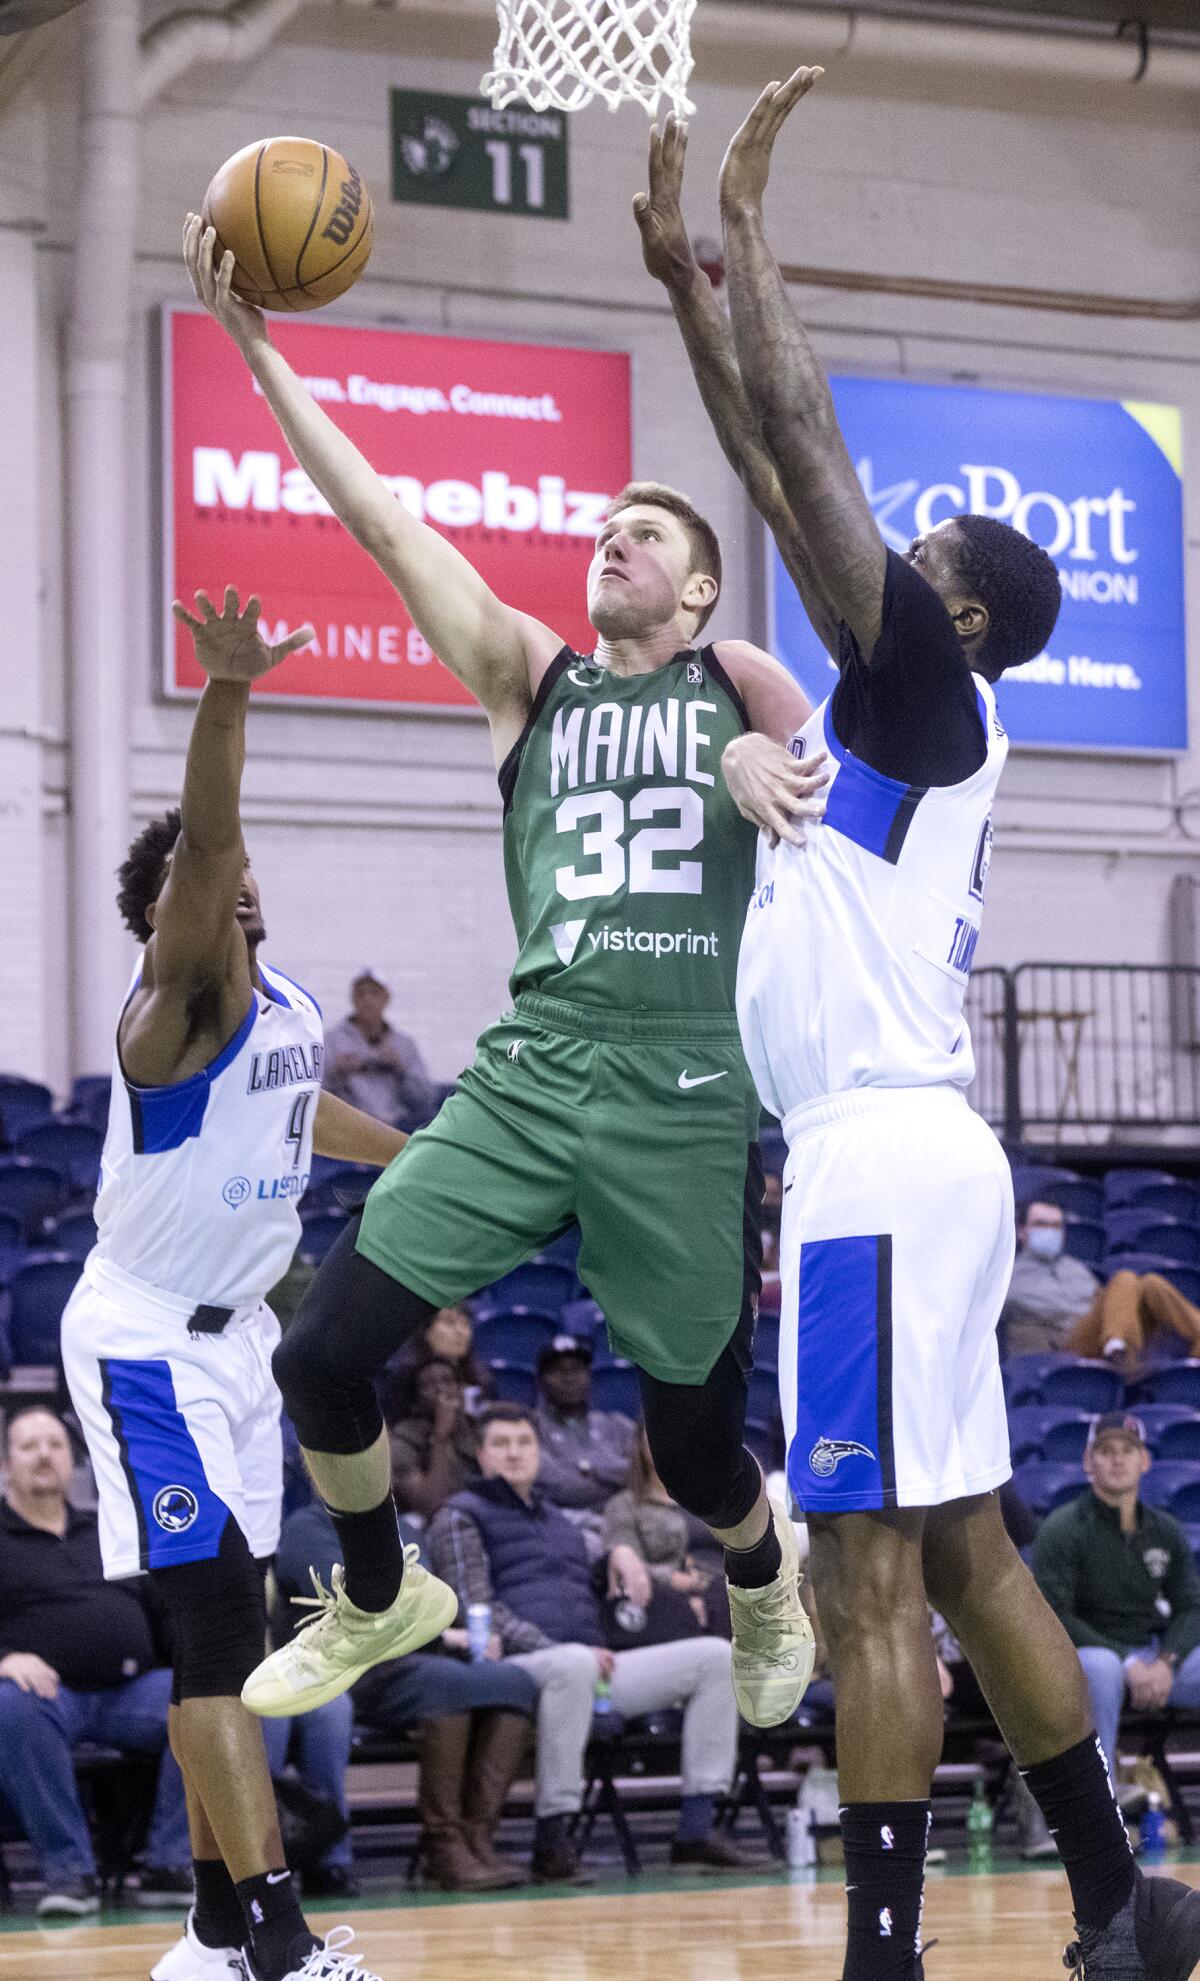 Matt Ryan (32) elevates between two defenders for a layup while playing for the G League's Maine Celtics last season.